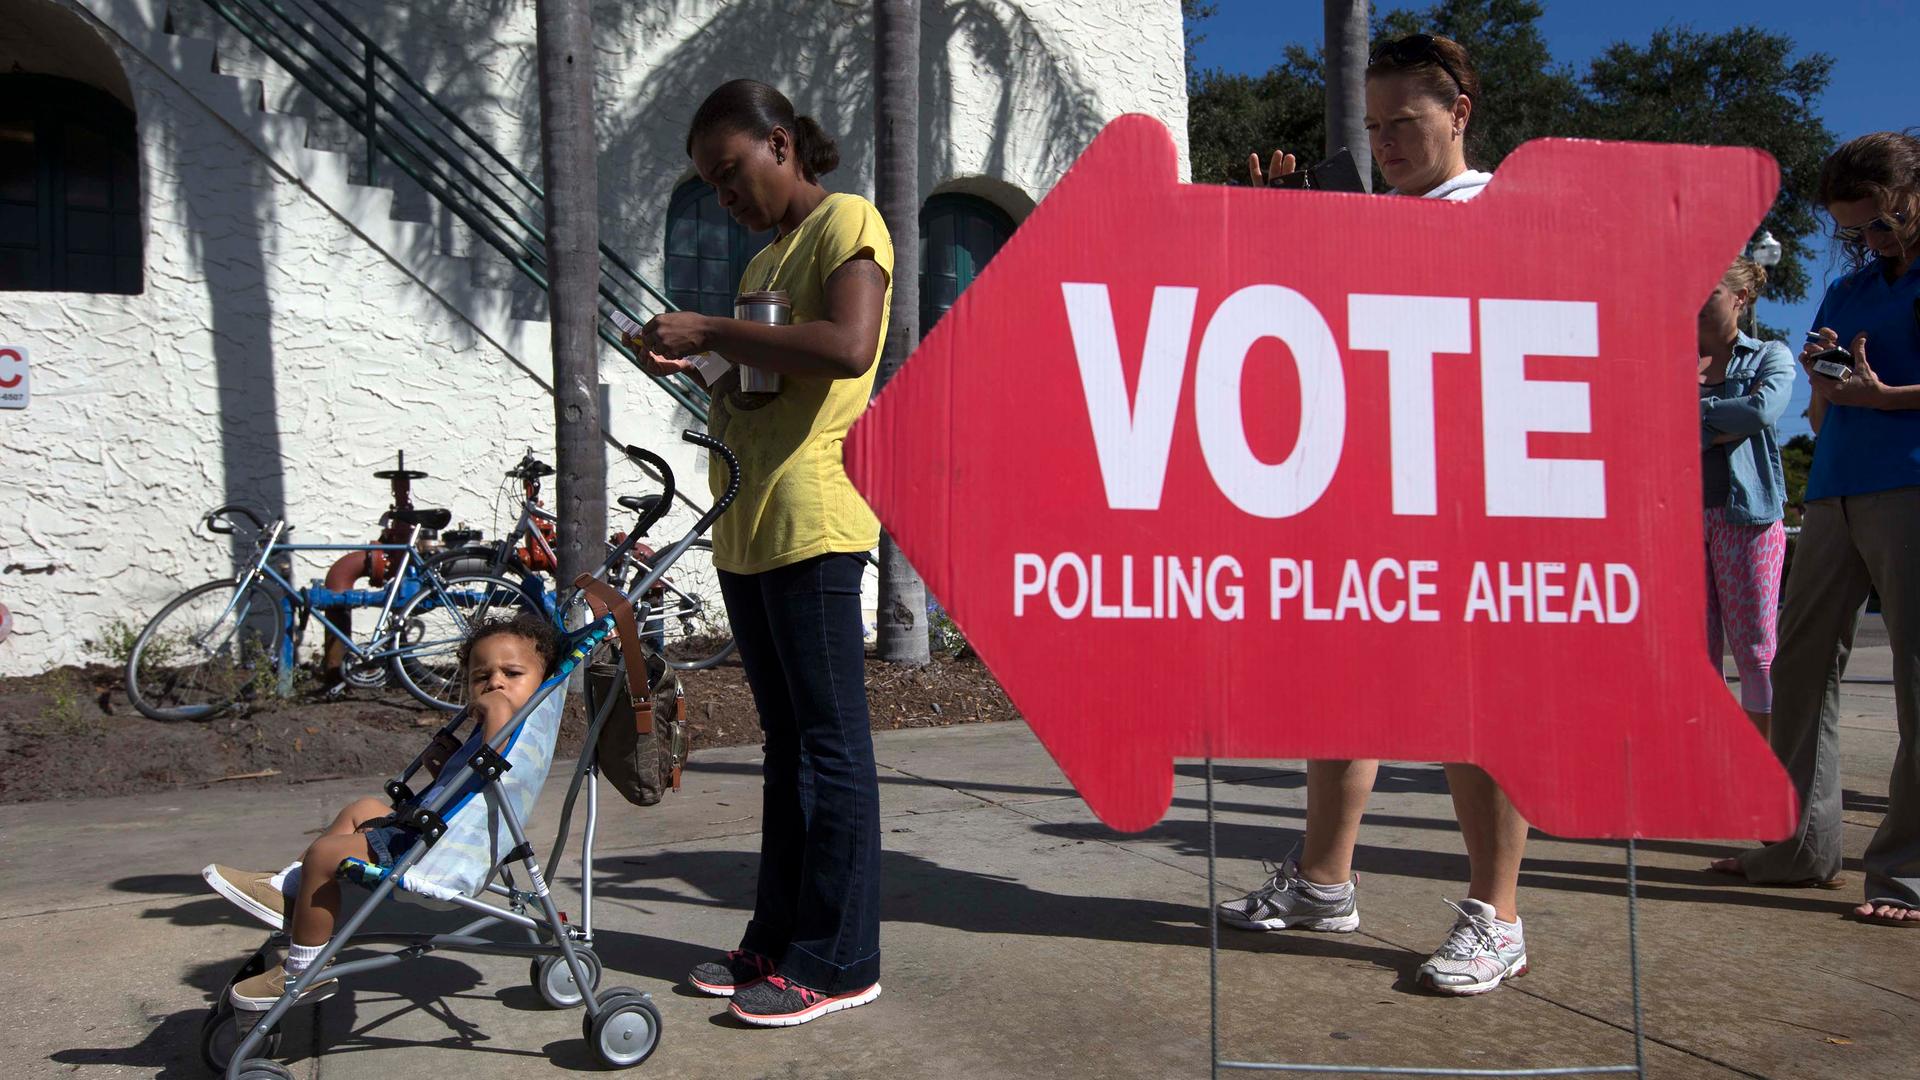 A sign saying vote in the foreground with people and a child in a stroller in the foreground